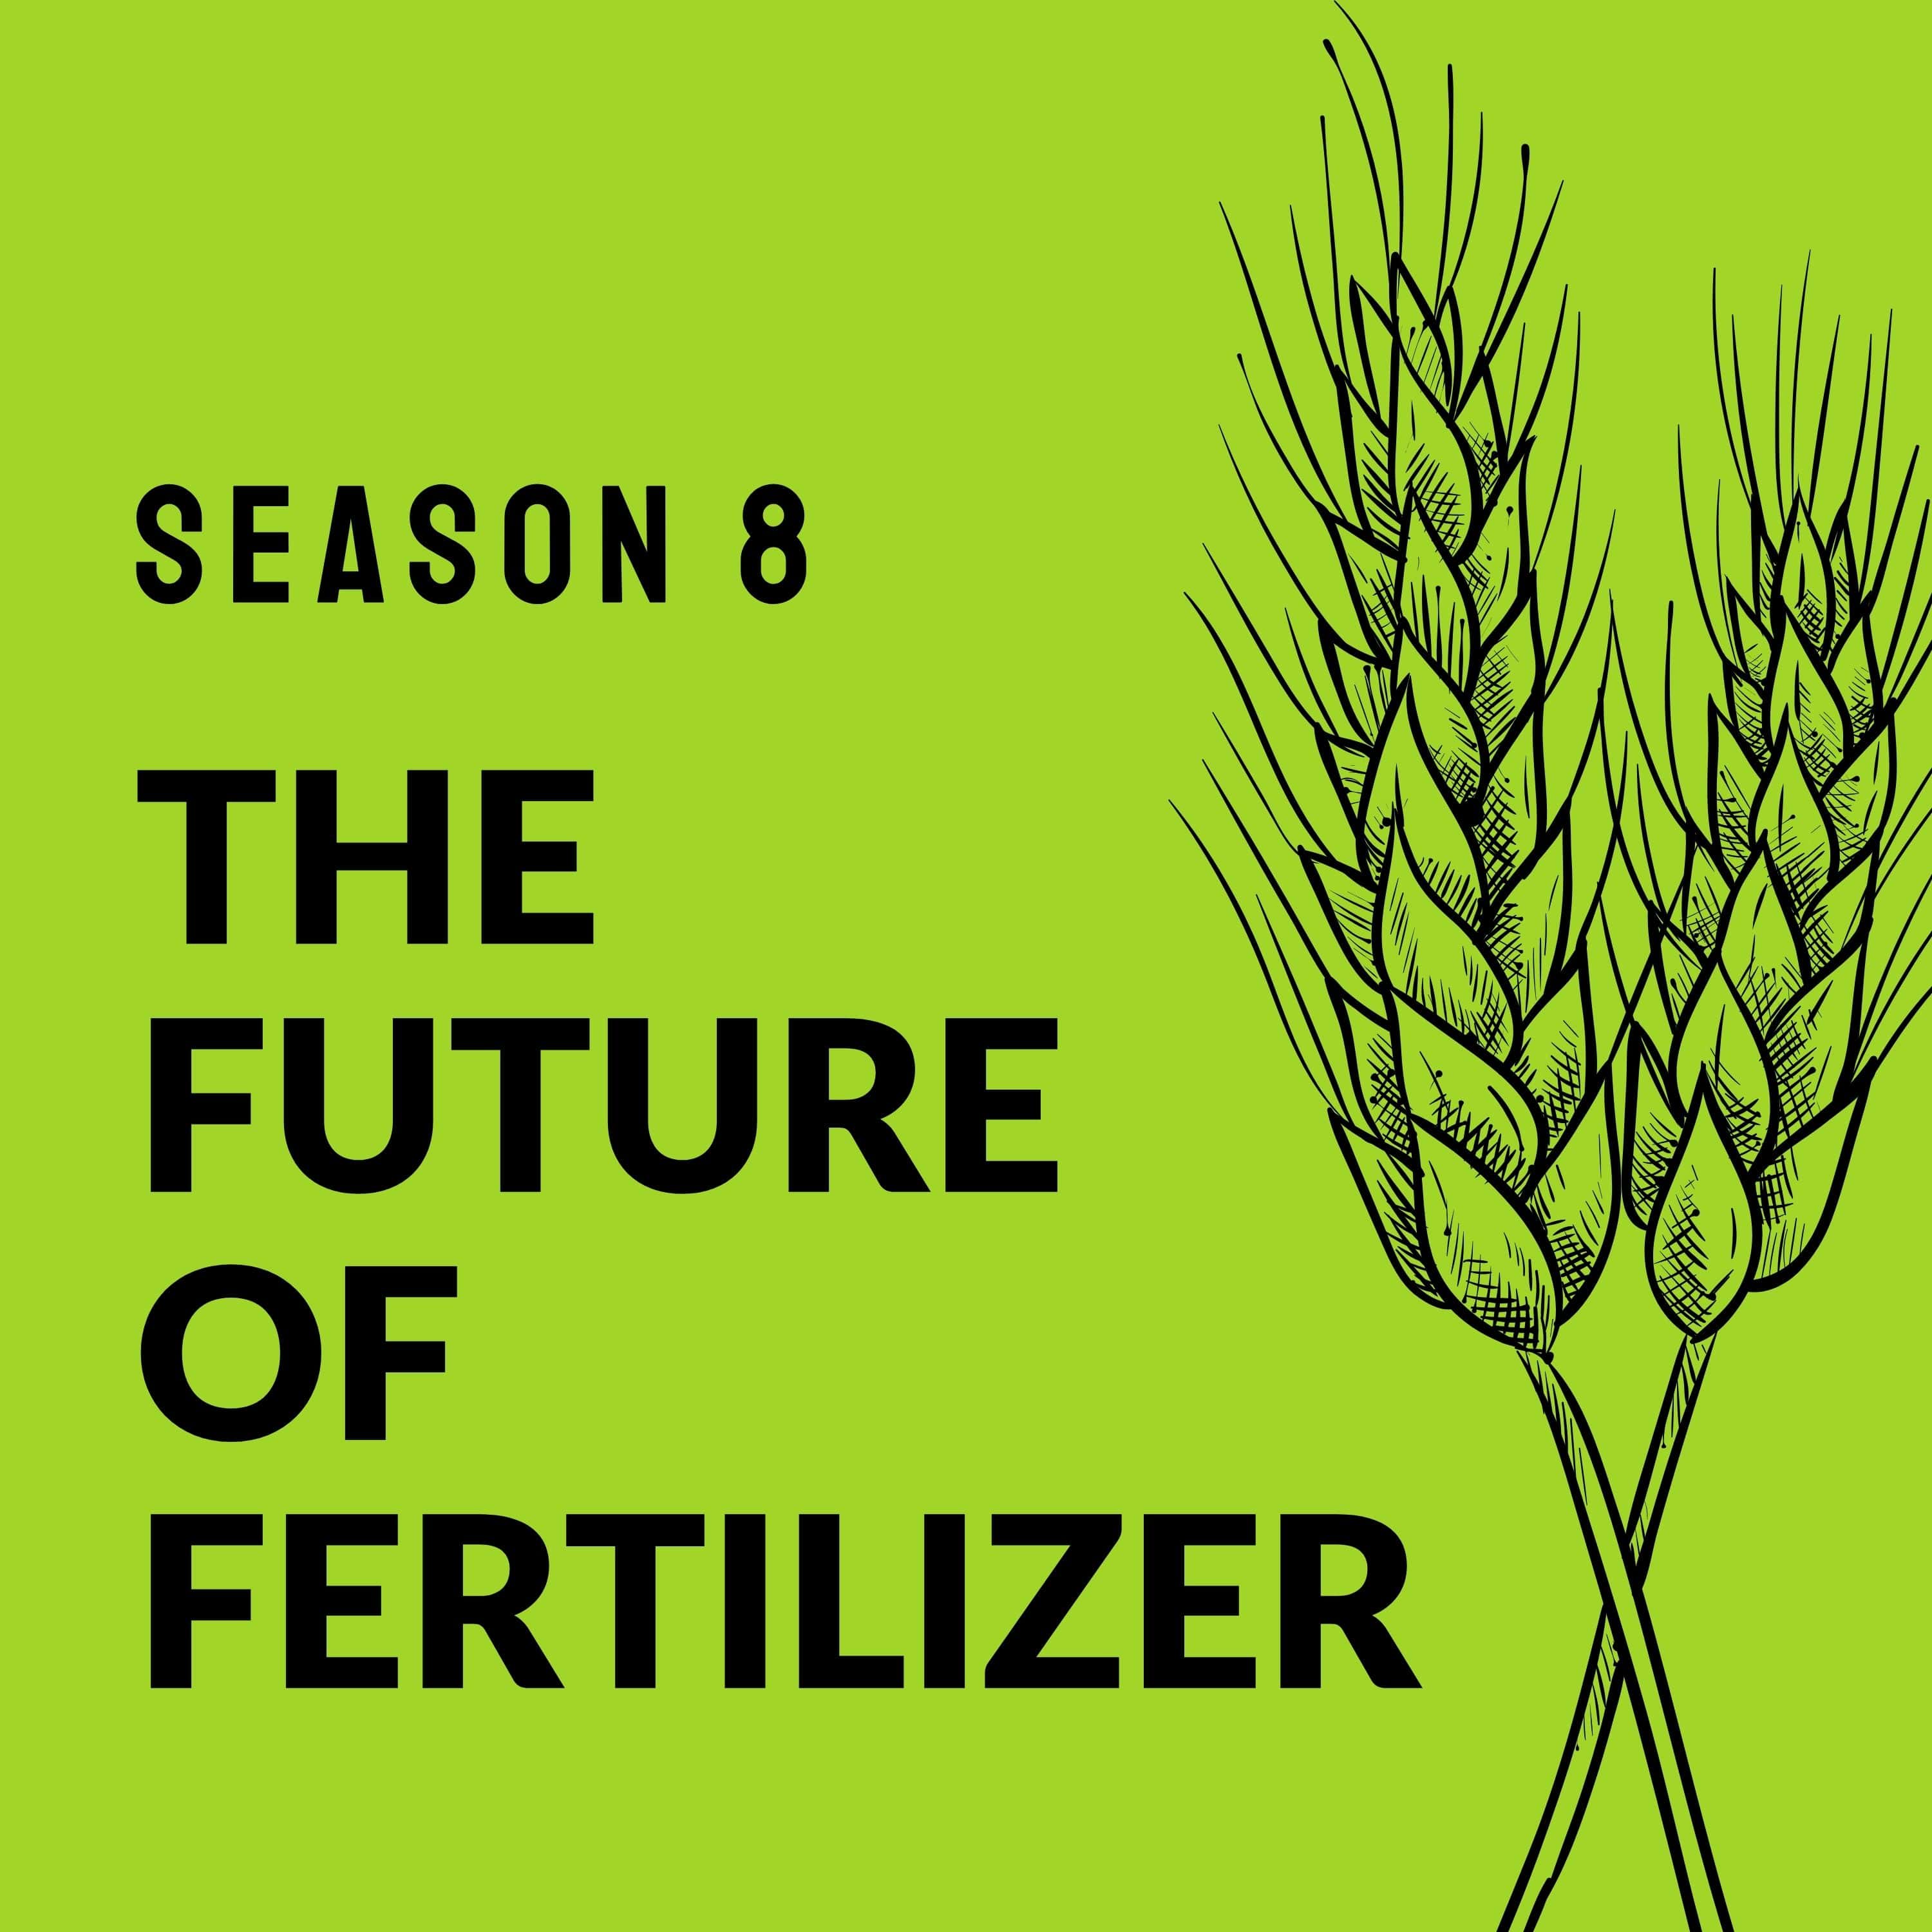 Future of fertilizer podcast, Red to Green Podcast